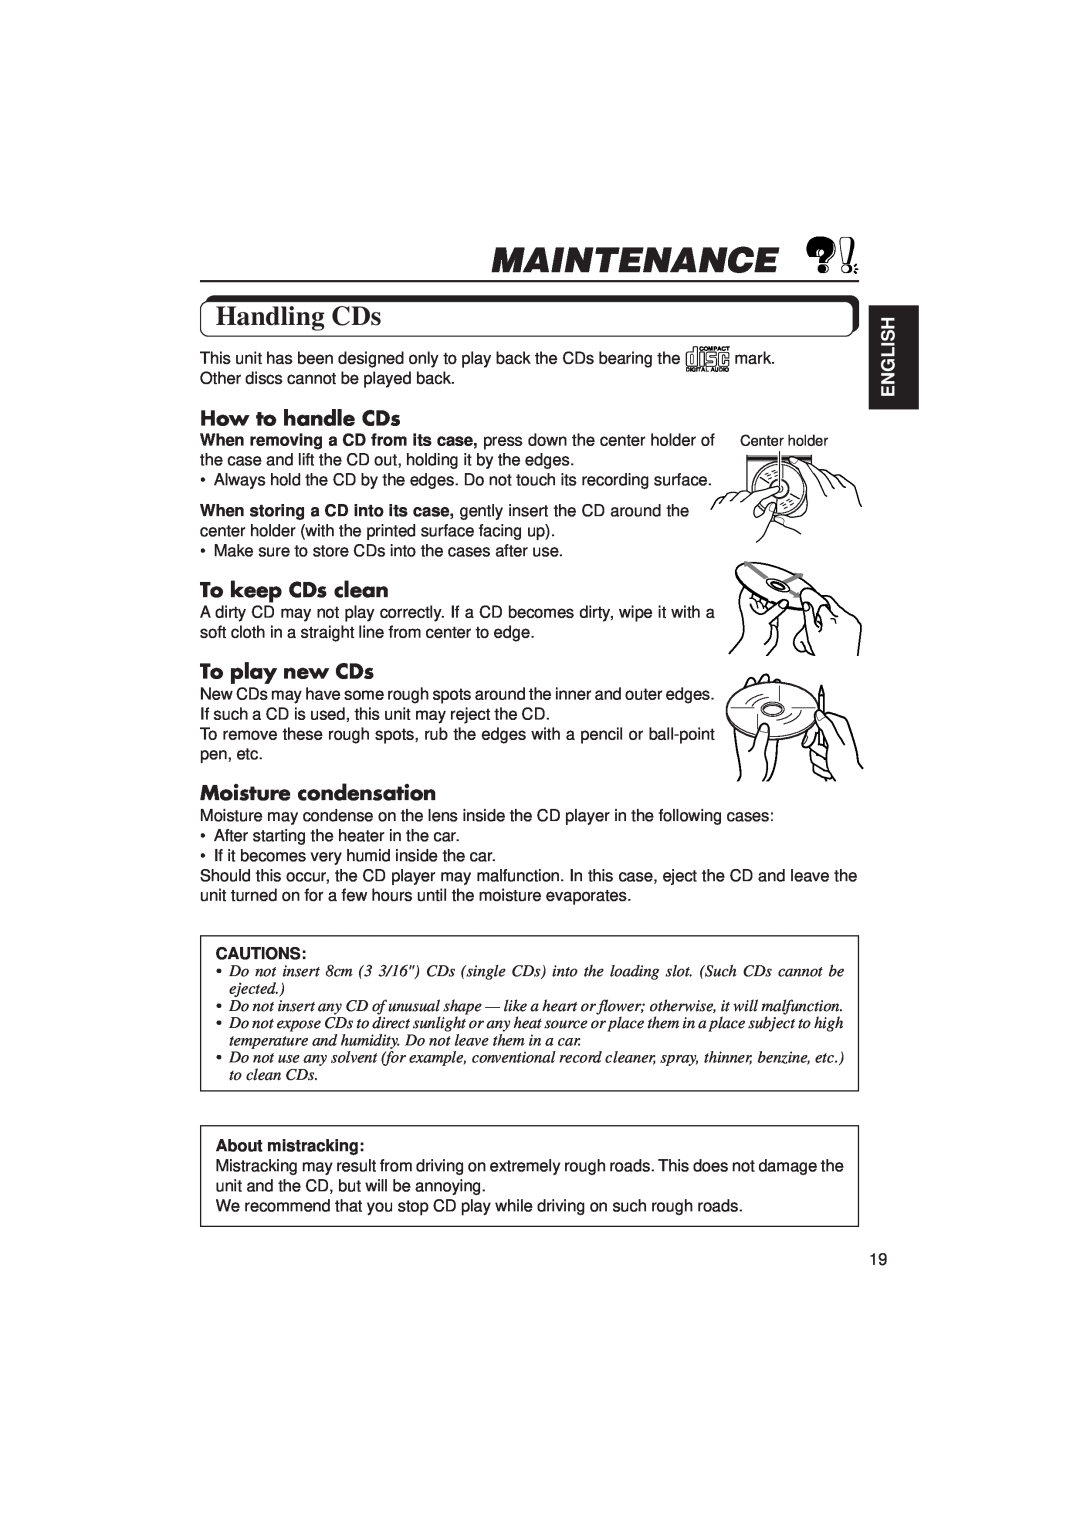 JVC KD-S636 manual Maintenance, Handling CDs, How to handle CDs, To keep CDs clean, To play new CDs, Moisture condensation 